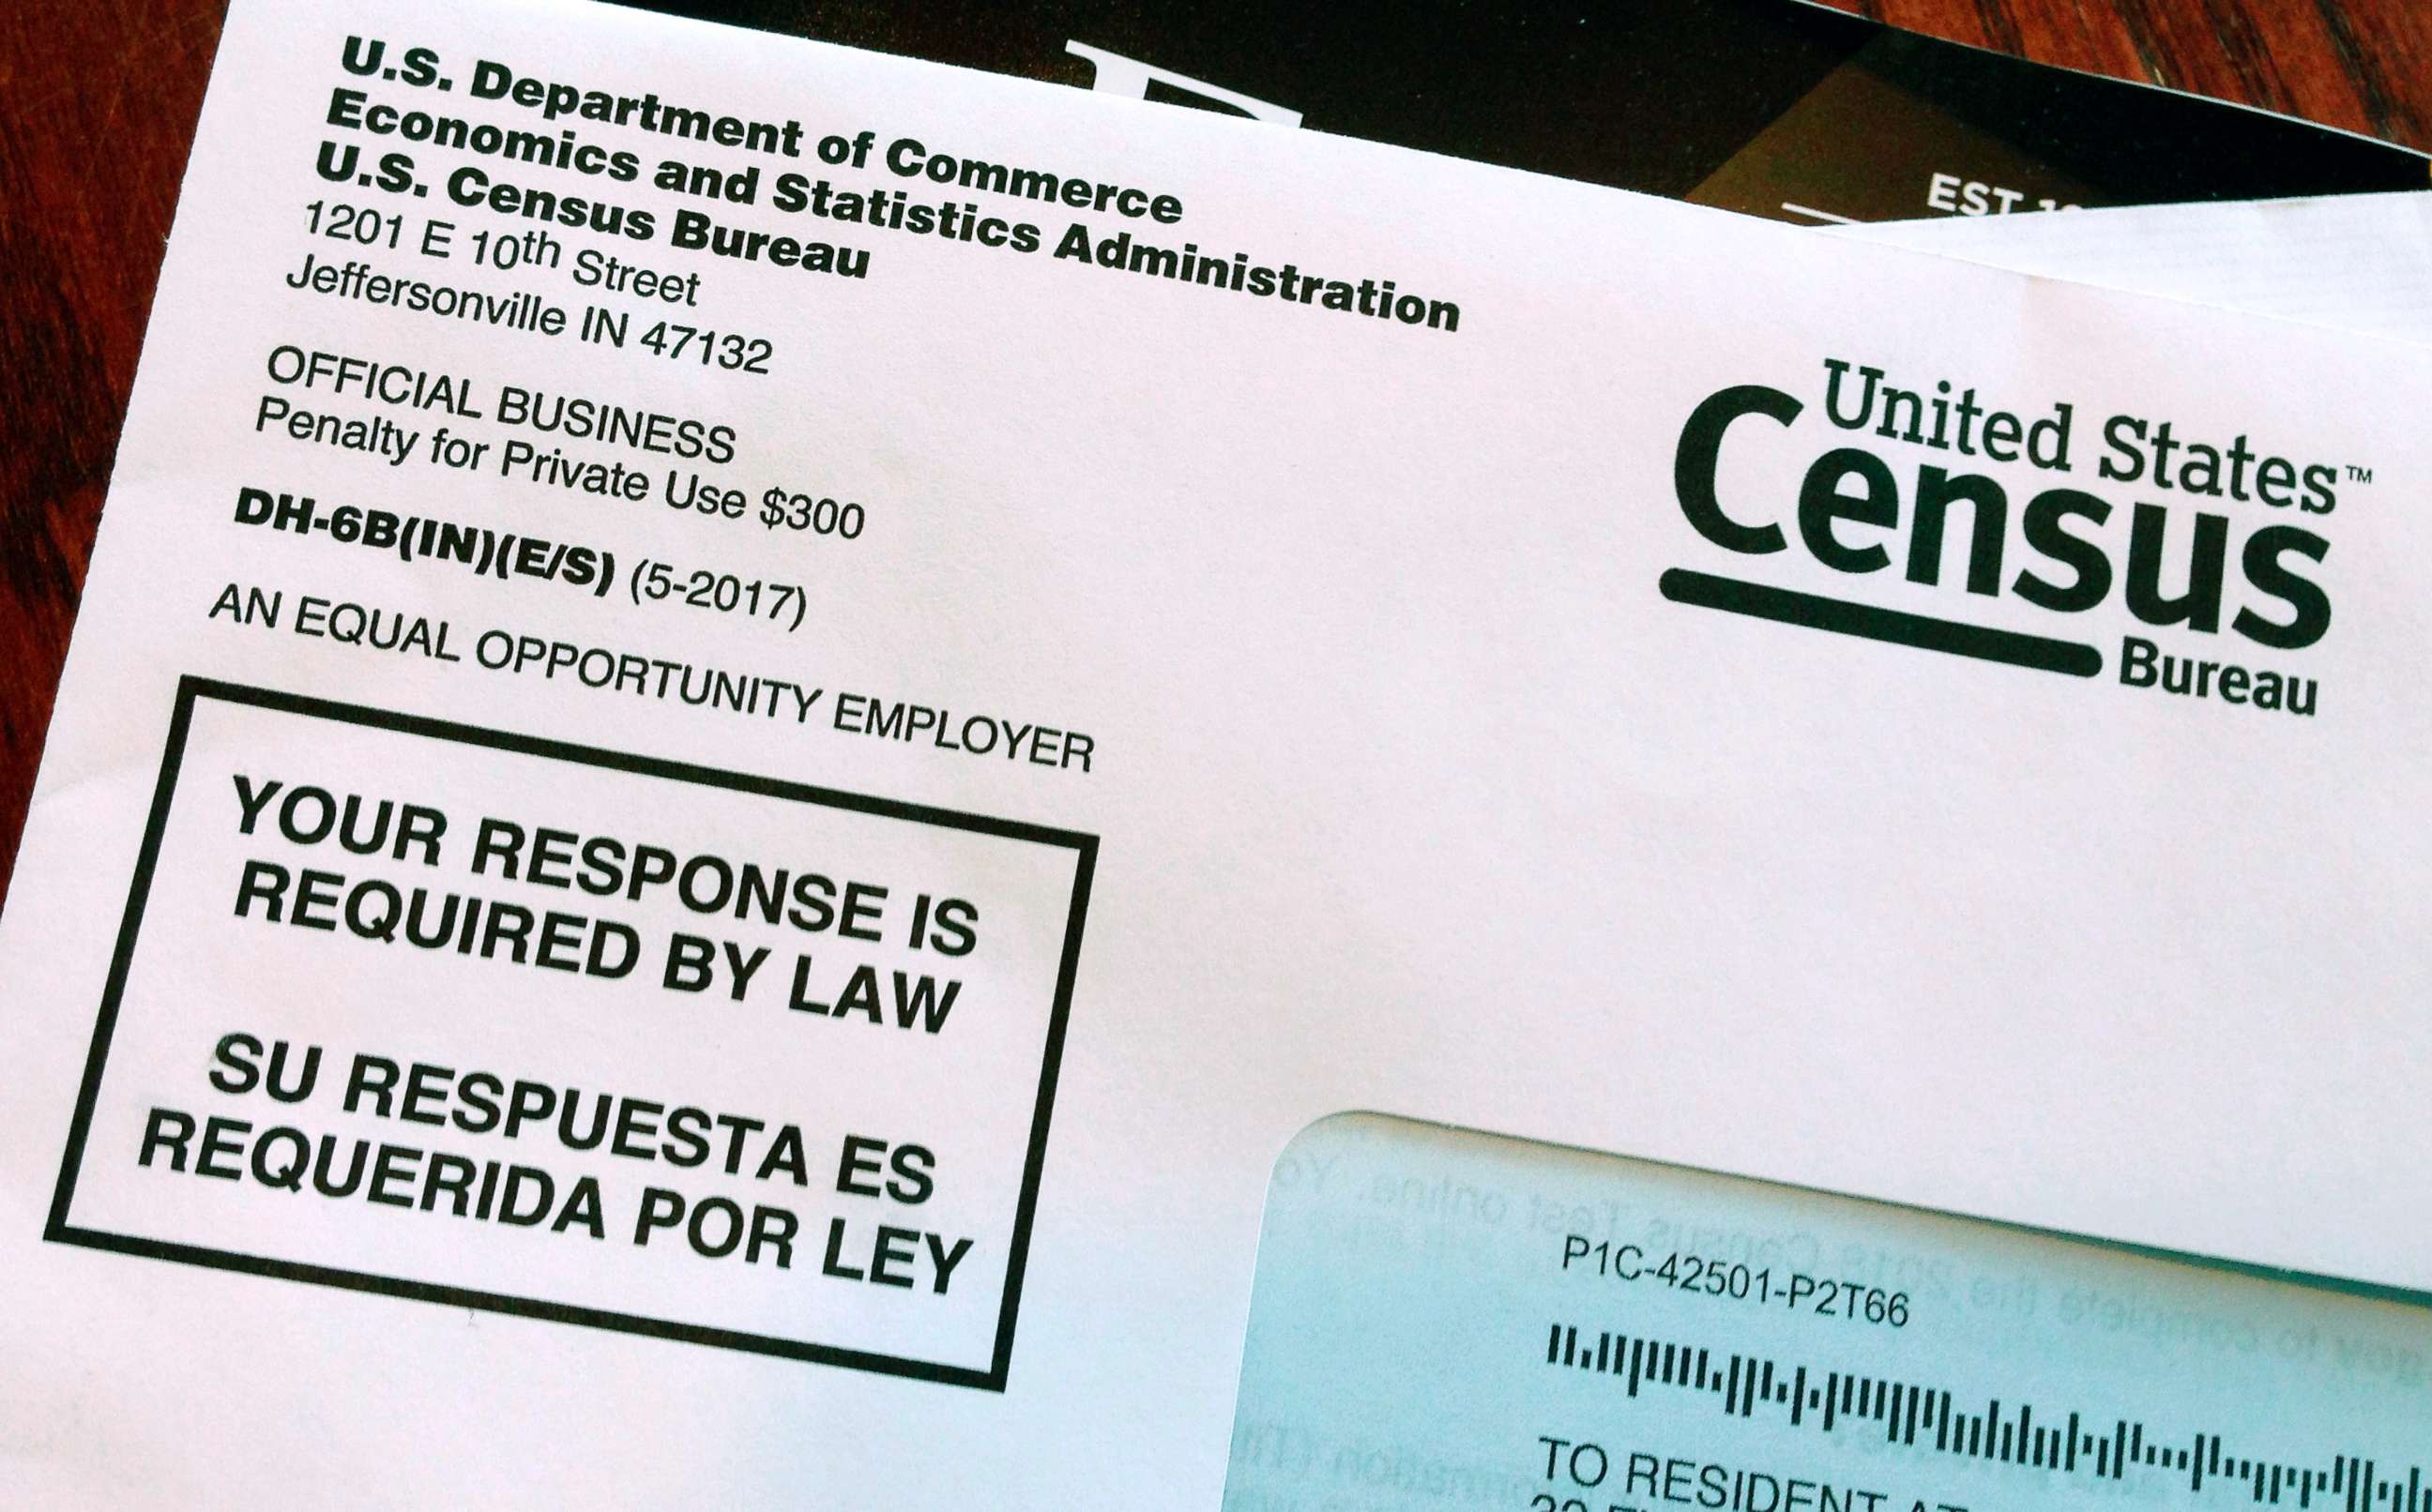 PHOTO: An envelope containing a 2018 census letter mailed to a U.S. resident as part of the nation's only test run of the 2020 Census, March 23, 2018.